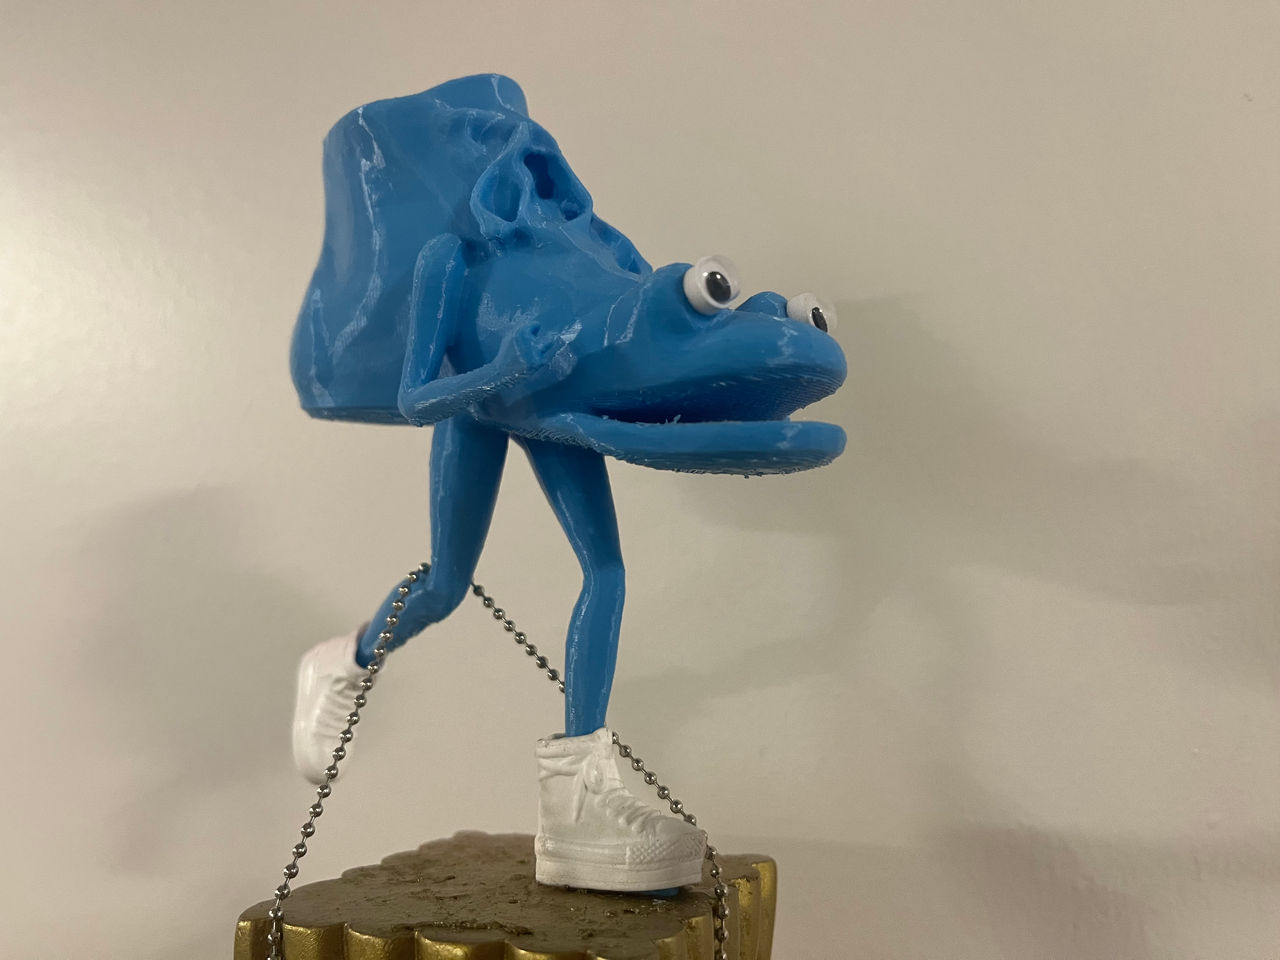 3D-printed trophy top of a running shoe